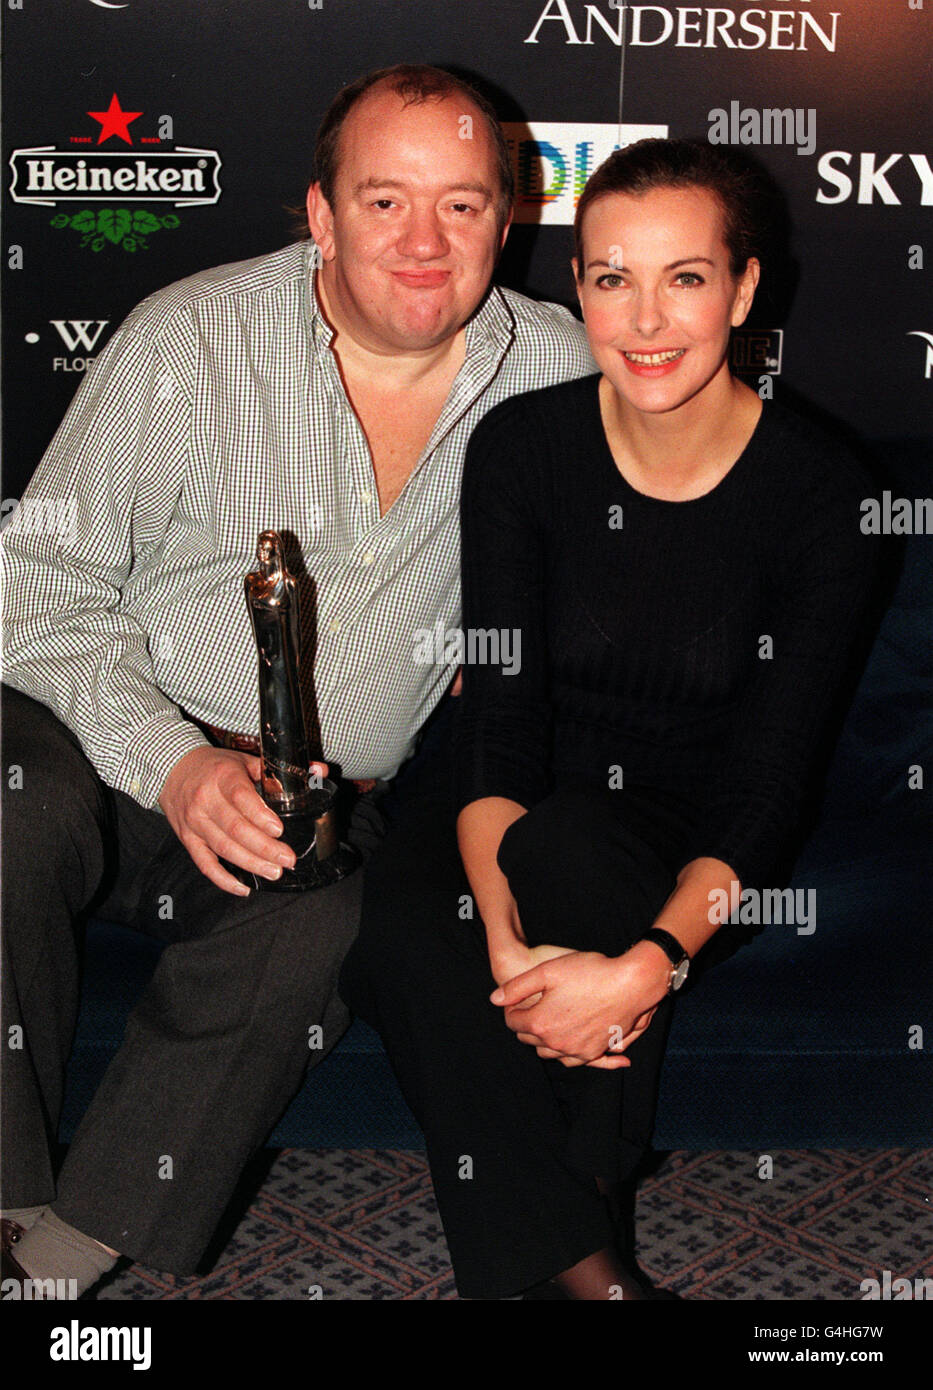 PA NEWS PHOTO 3/12/98 COMEDIAN MEL SMITH AND FRENCH ACTRESS CAROLE BOUQUET AT A PHOTCALL AT THE OLD VIC THEATRE IN LONDON, WHERE THEY WILL BE PRESENTERS OF THE 1998 EUROPEAN FILM AWARDS. Stock Photo